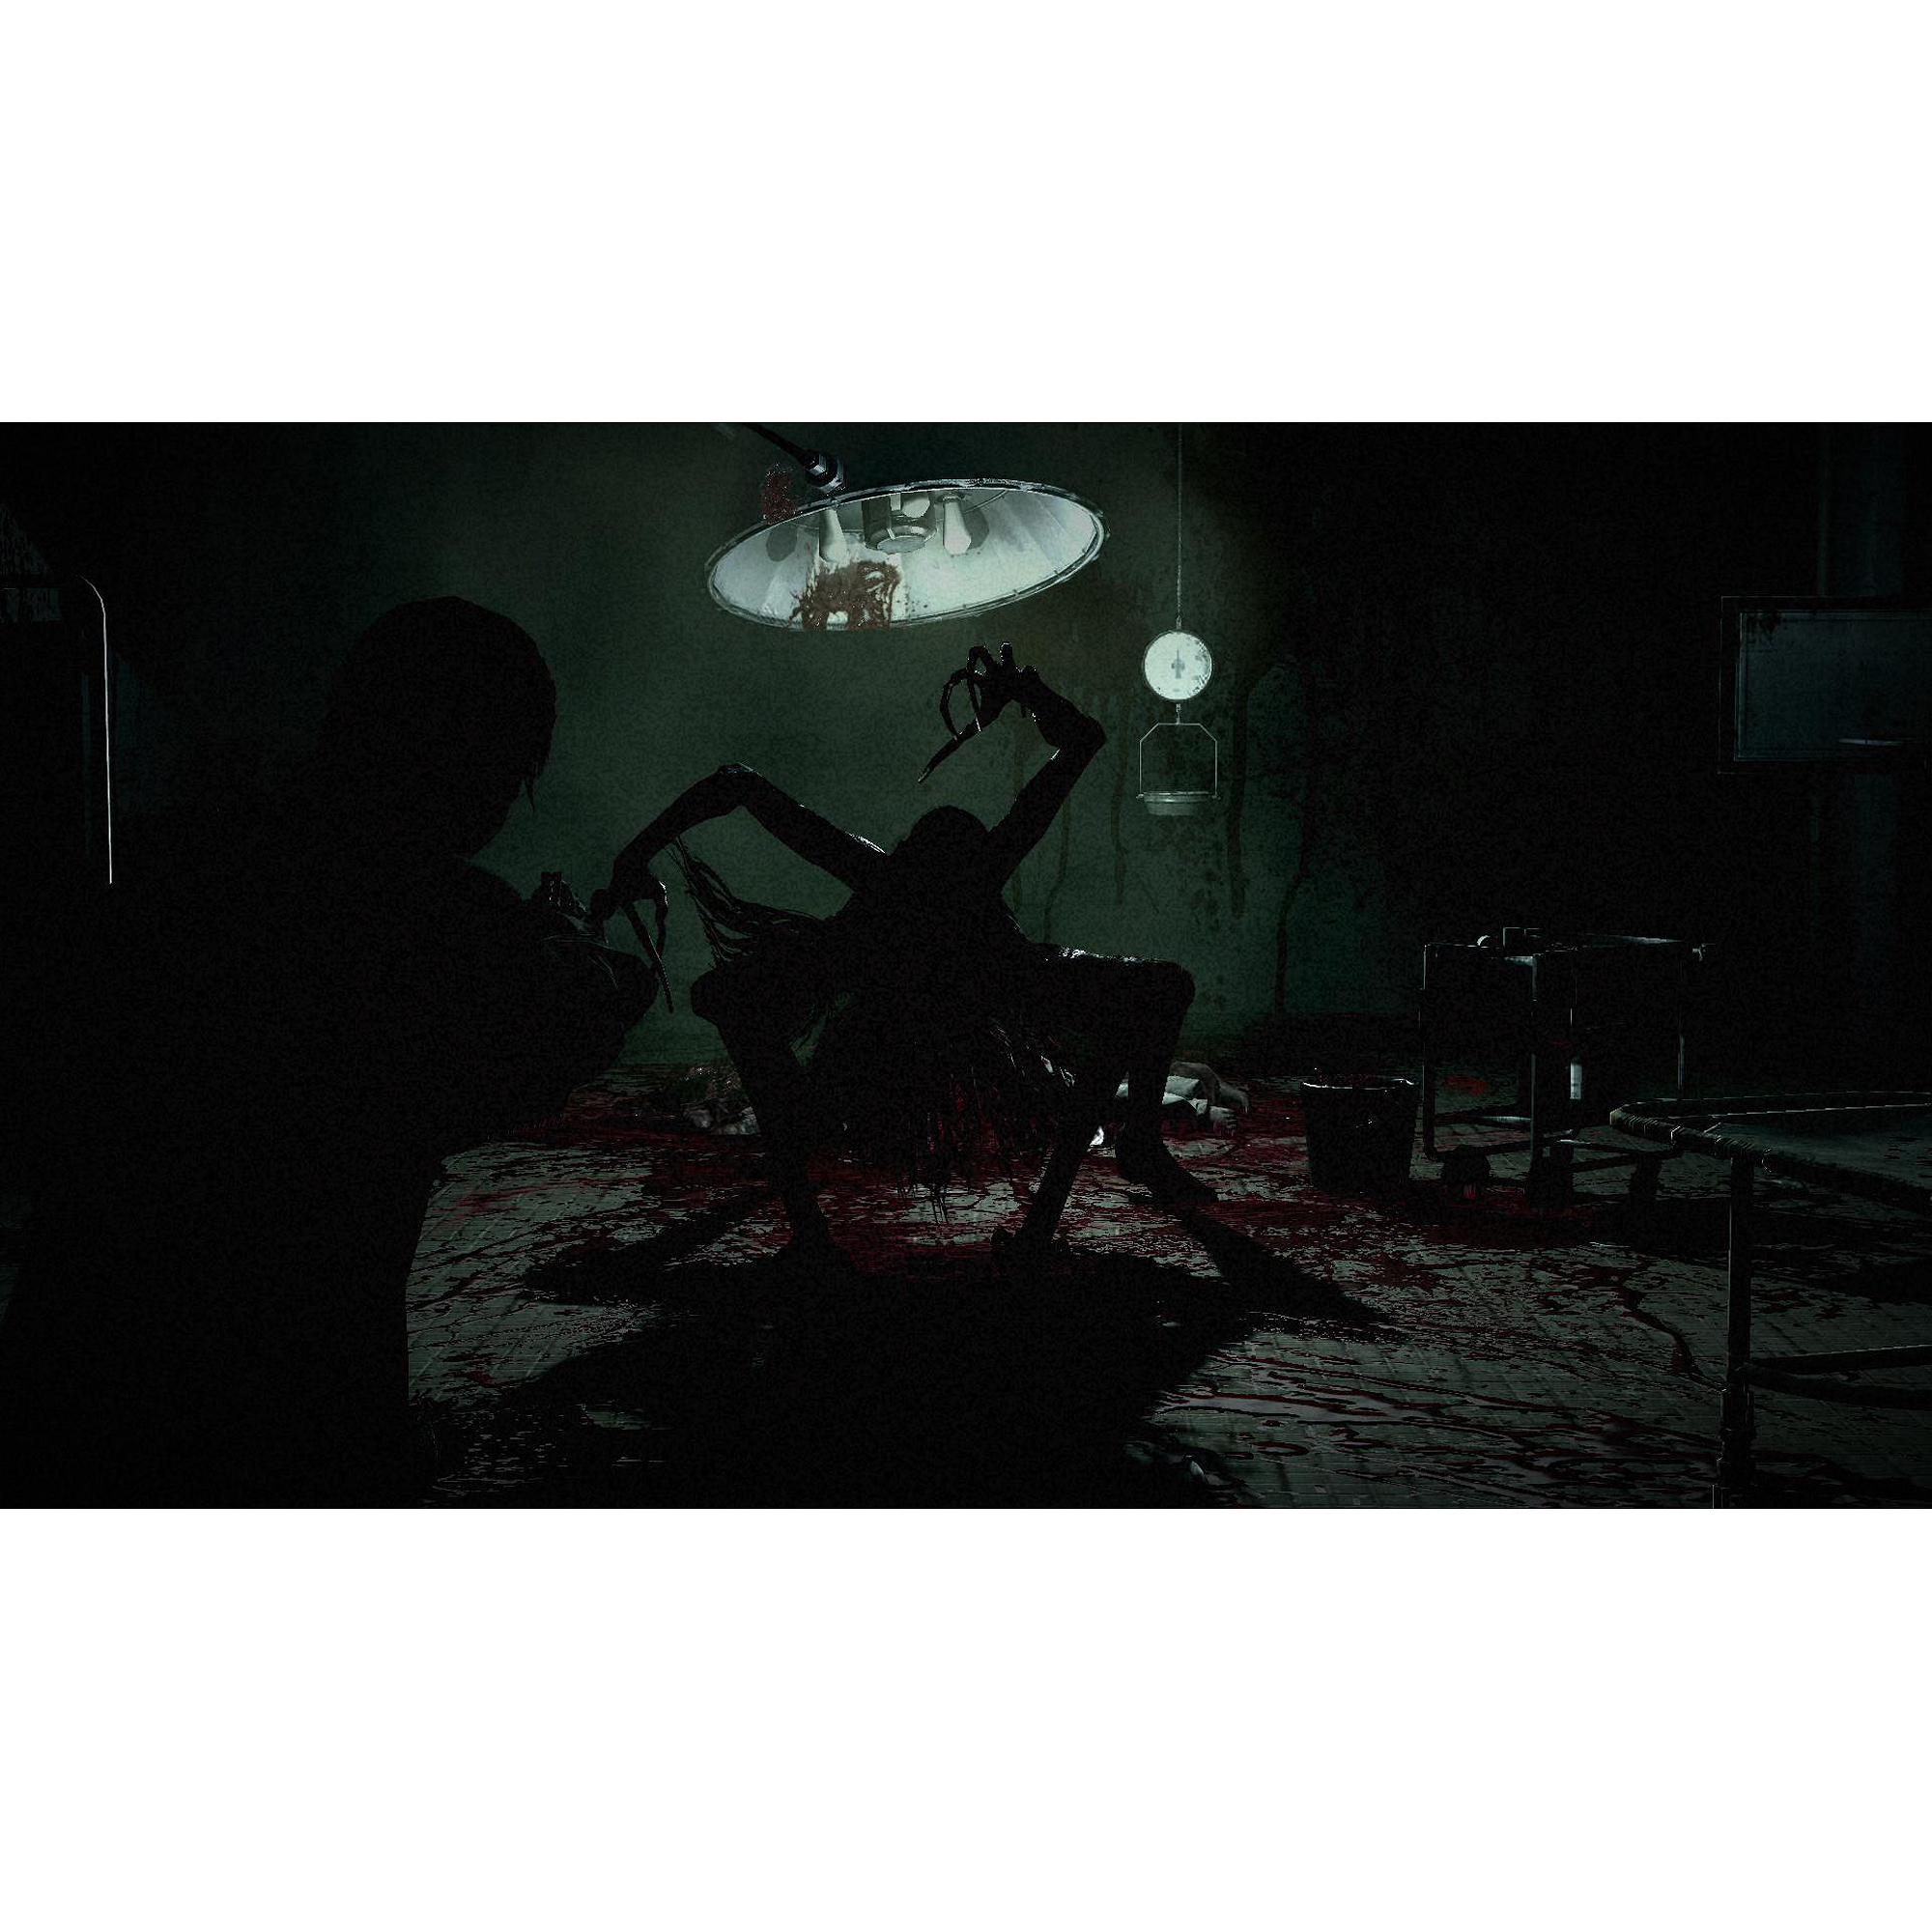 The Evil Within, Bethesda Softworks, Xbox One, [Physical], 93155118539 - image 4 of 5